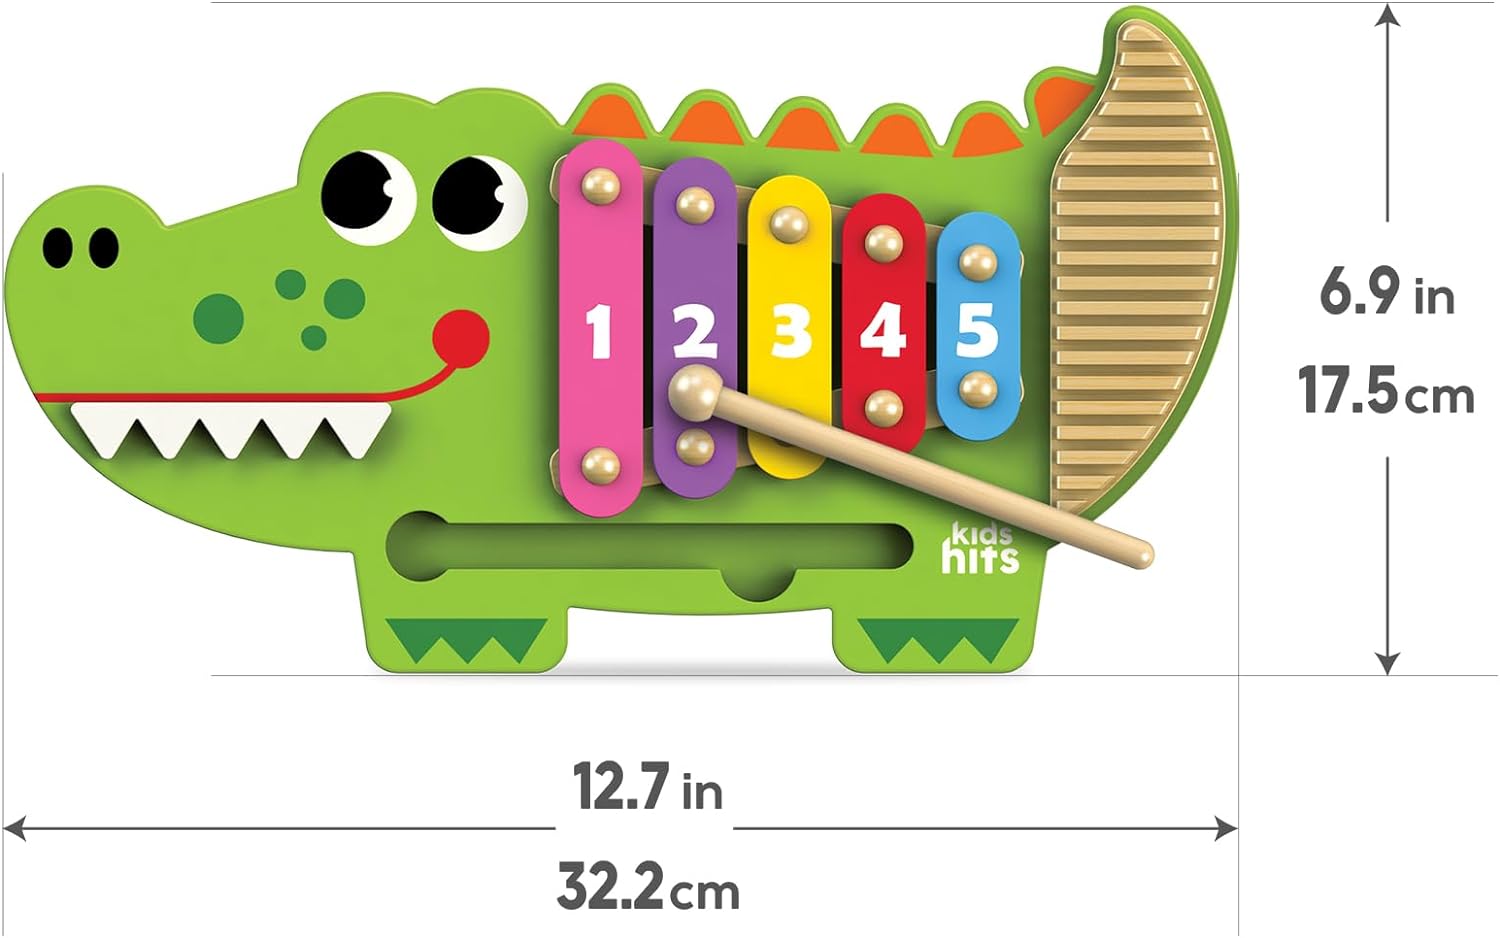 Kids Hits Harmonize Playtime with The Wooden Croco Xylophone Adventure